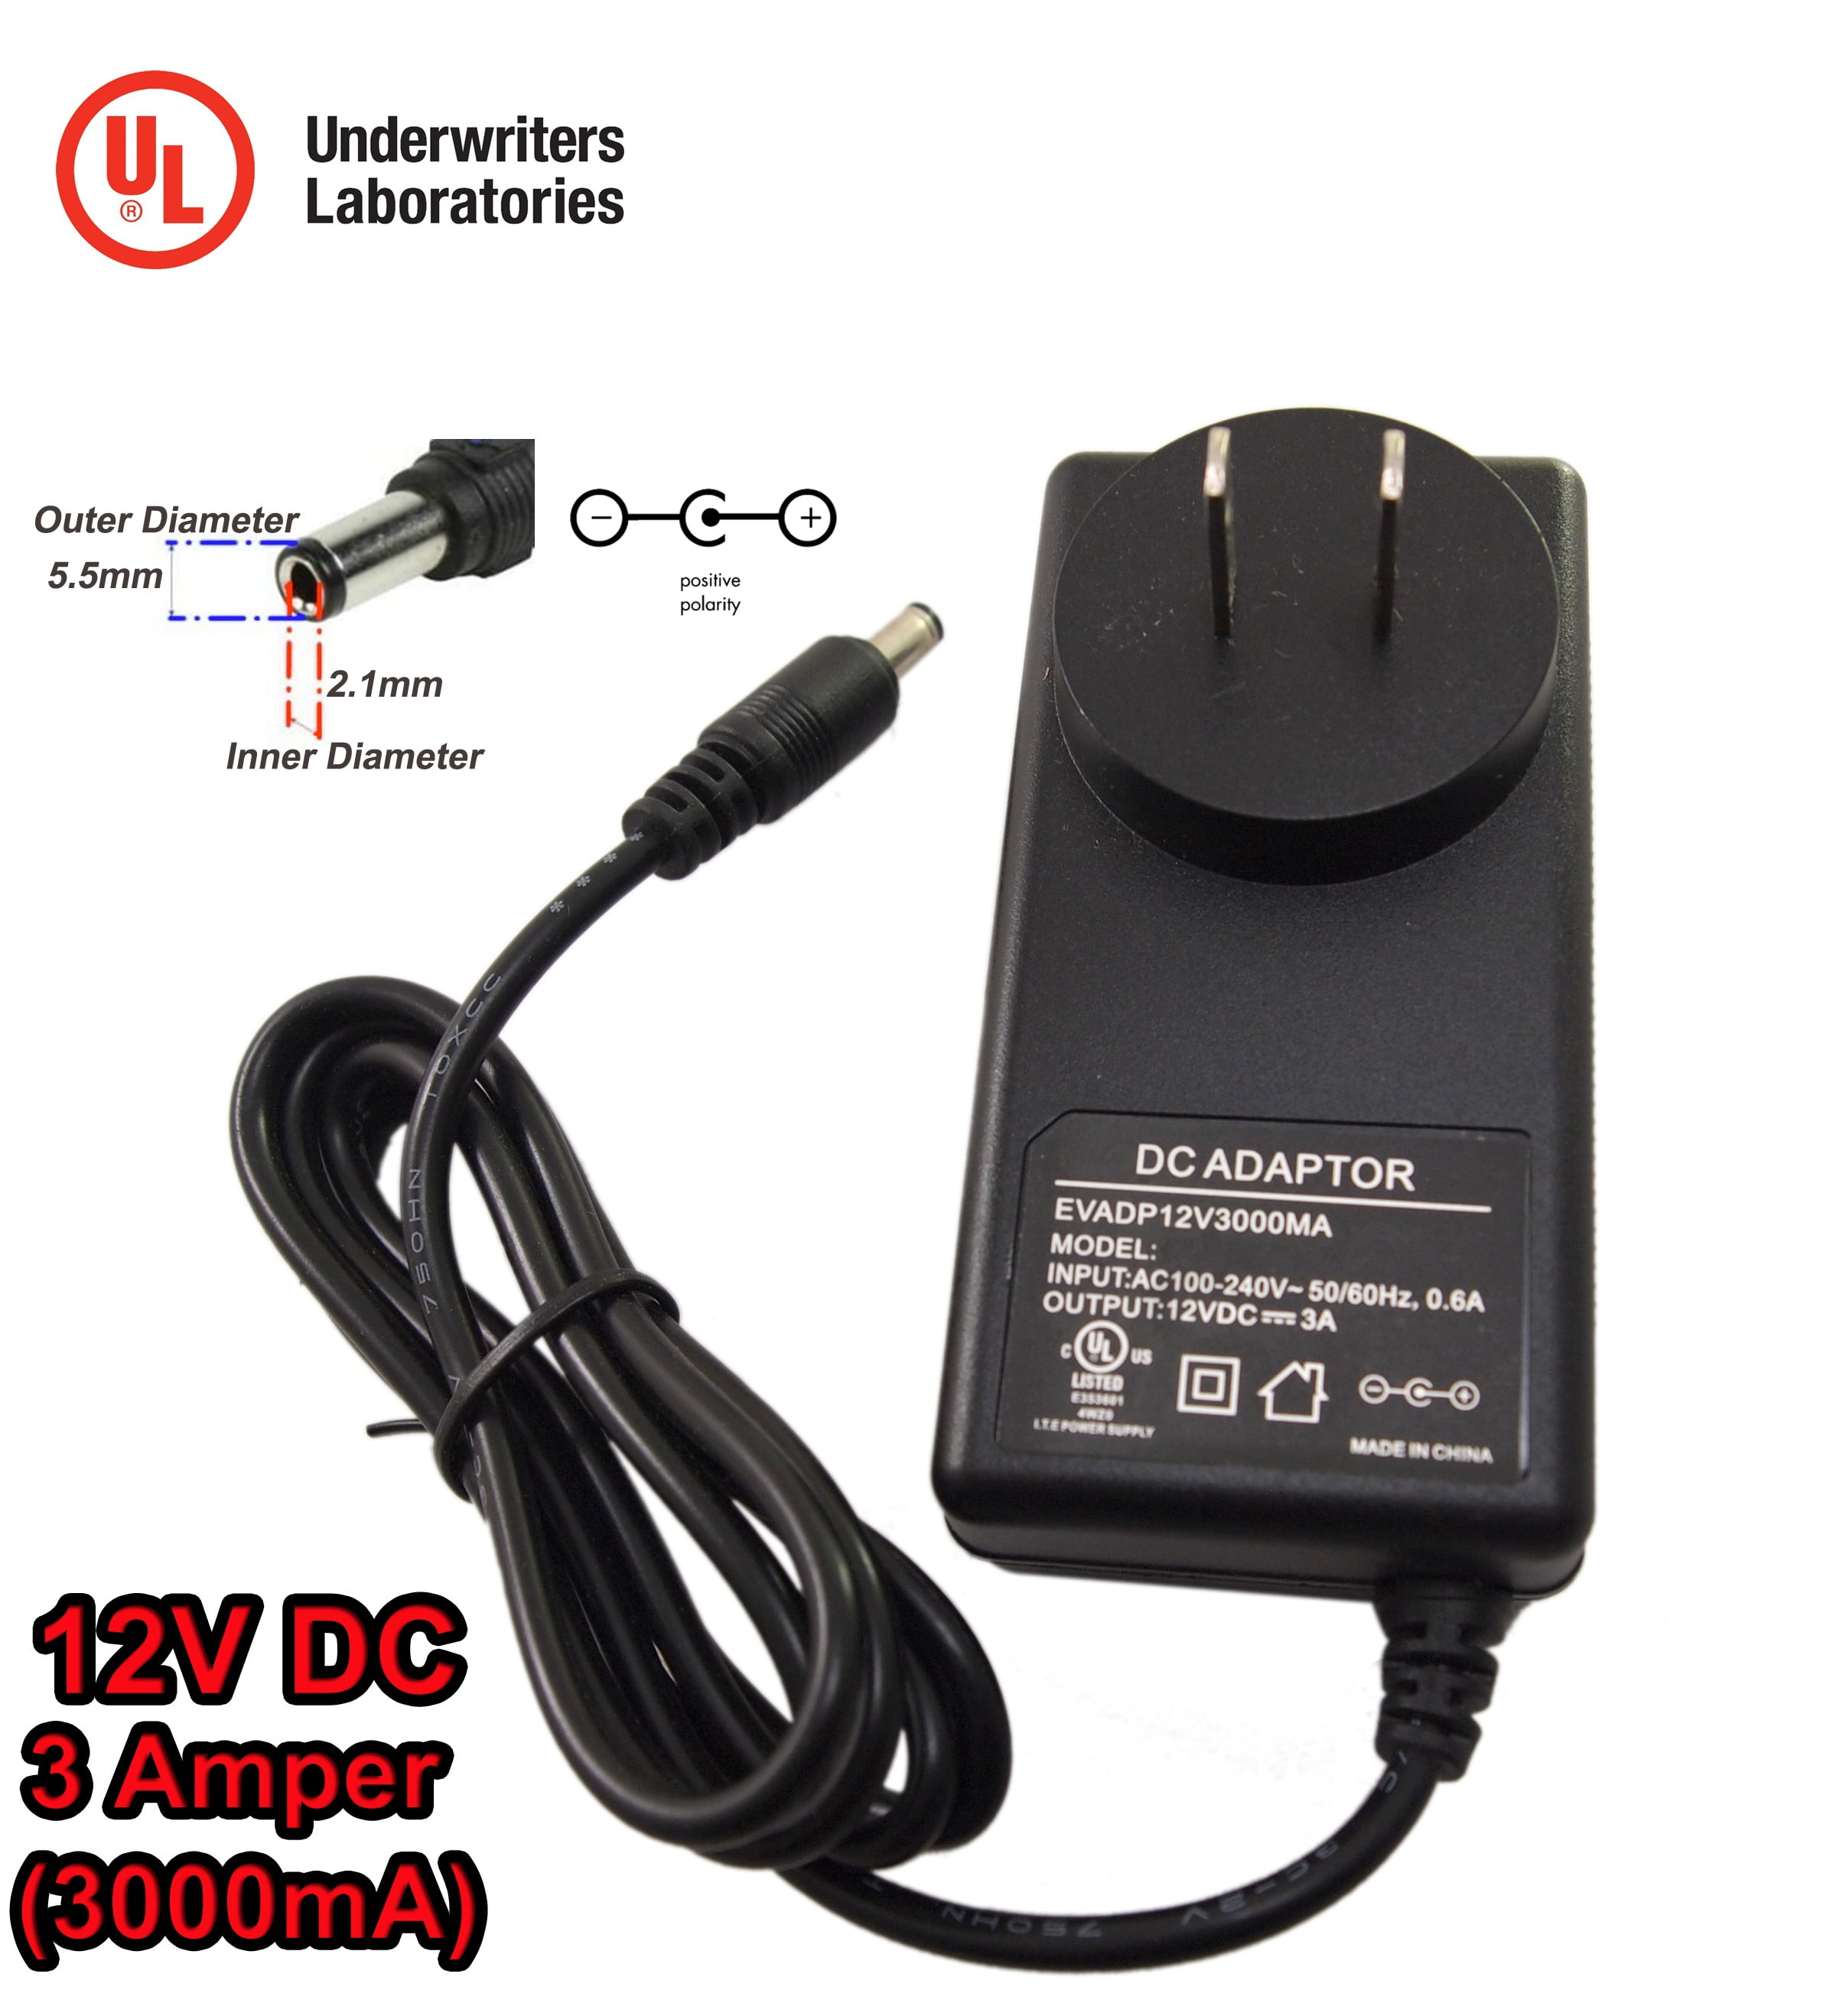 Evertech DC 12V 3 Amp 3000mA UL certified Power Supply Adapter for